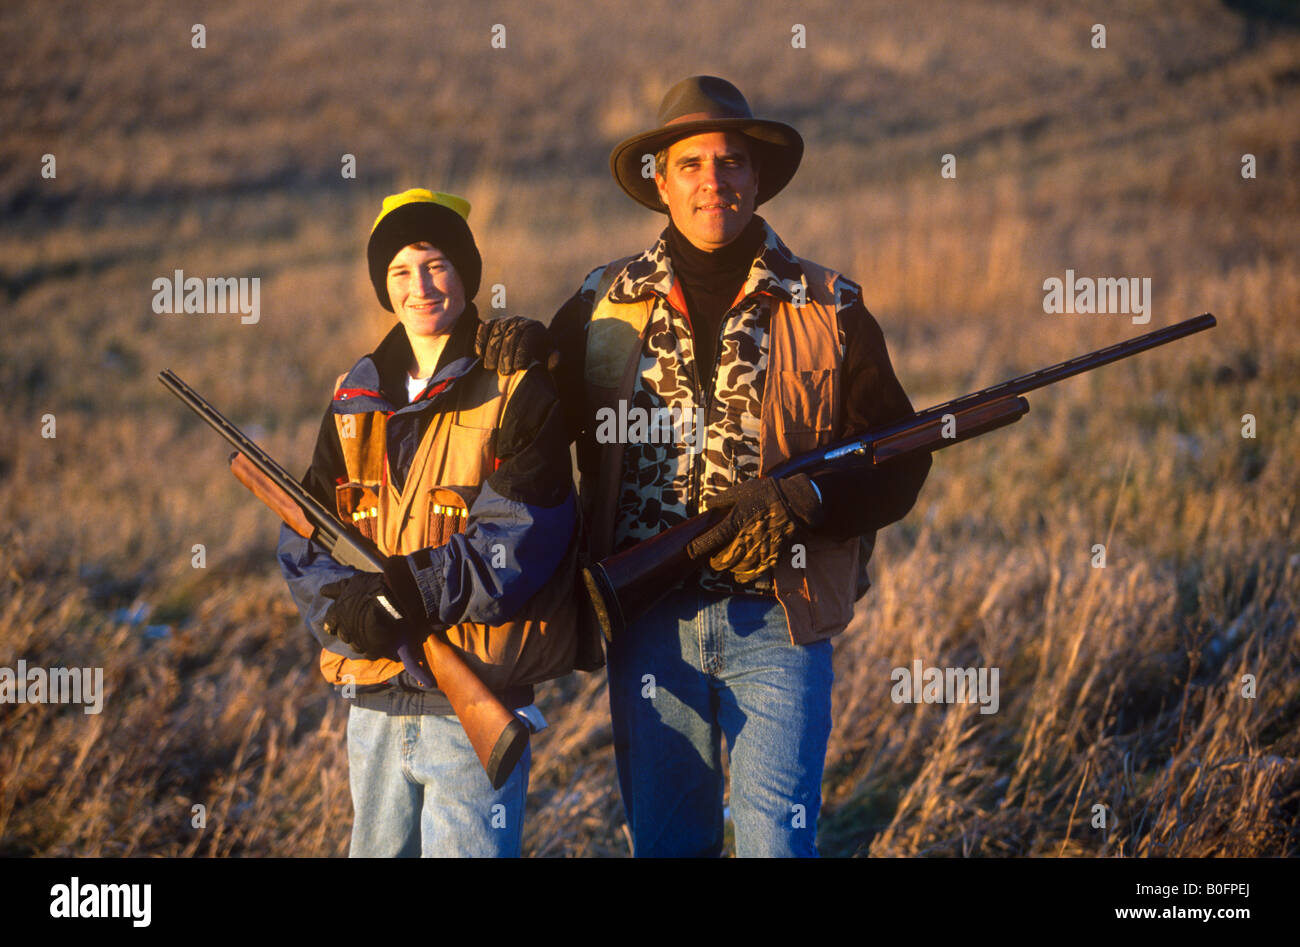 A father and son bird hunting in a grassy field at the end of the day. Stock Photo